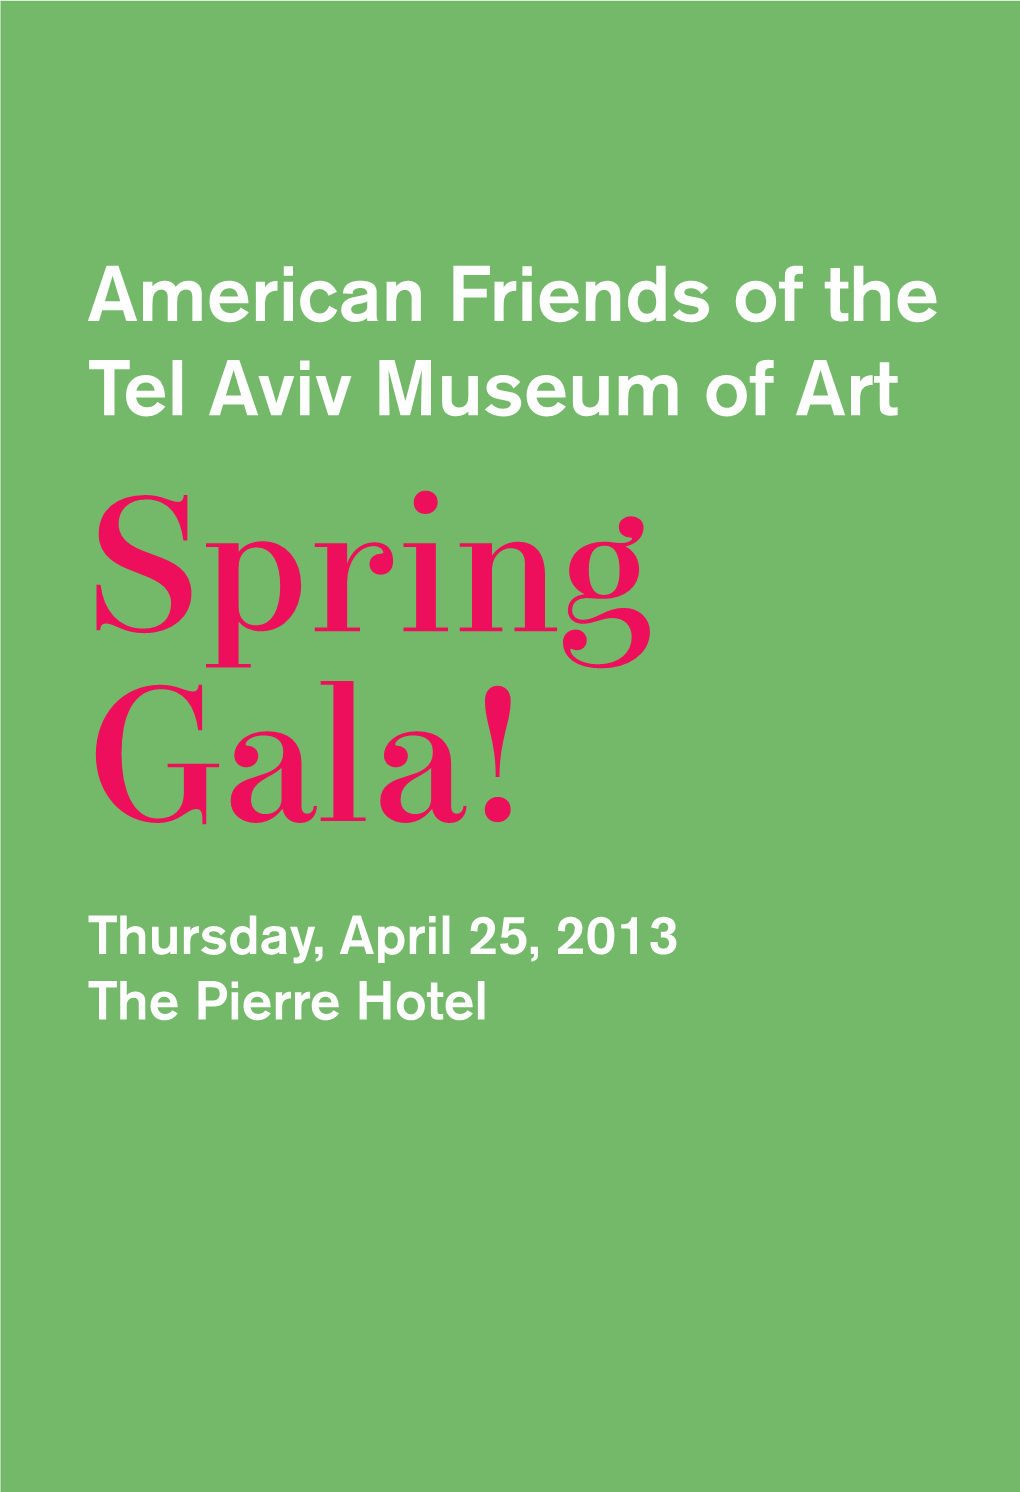 American Friends of the Tel Aviv Museum of Art Spring Gala! Thursday, April 25, 2013 the Pierre Hotel